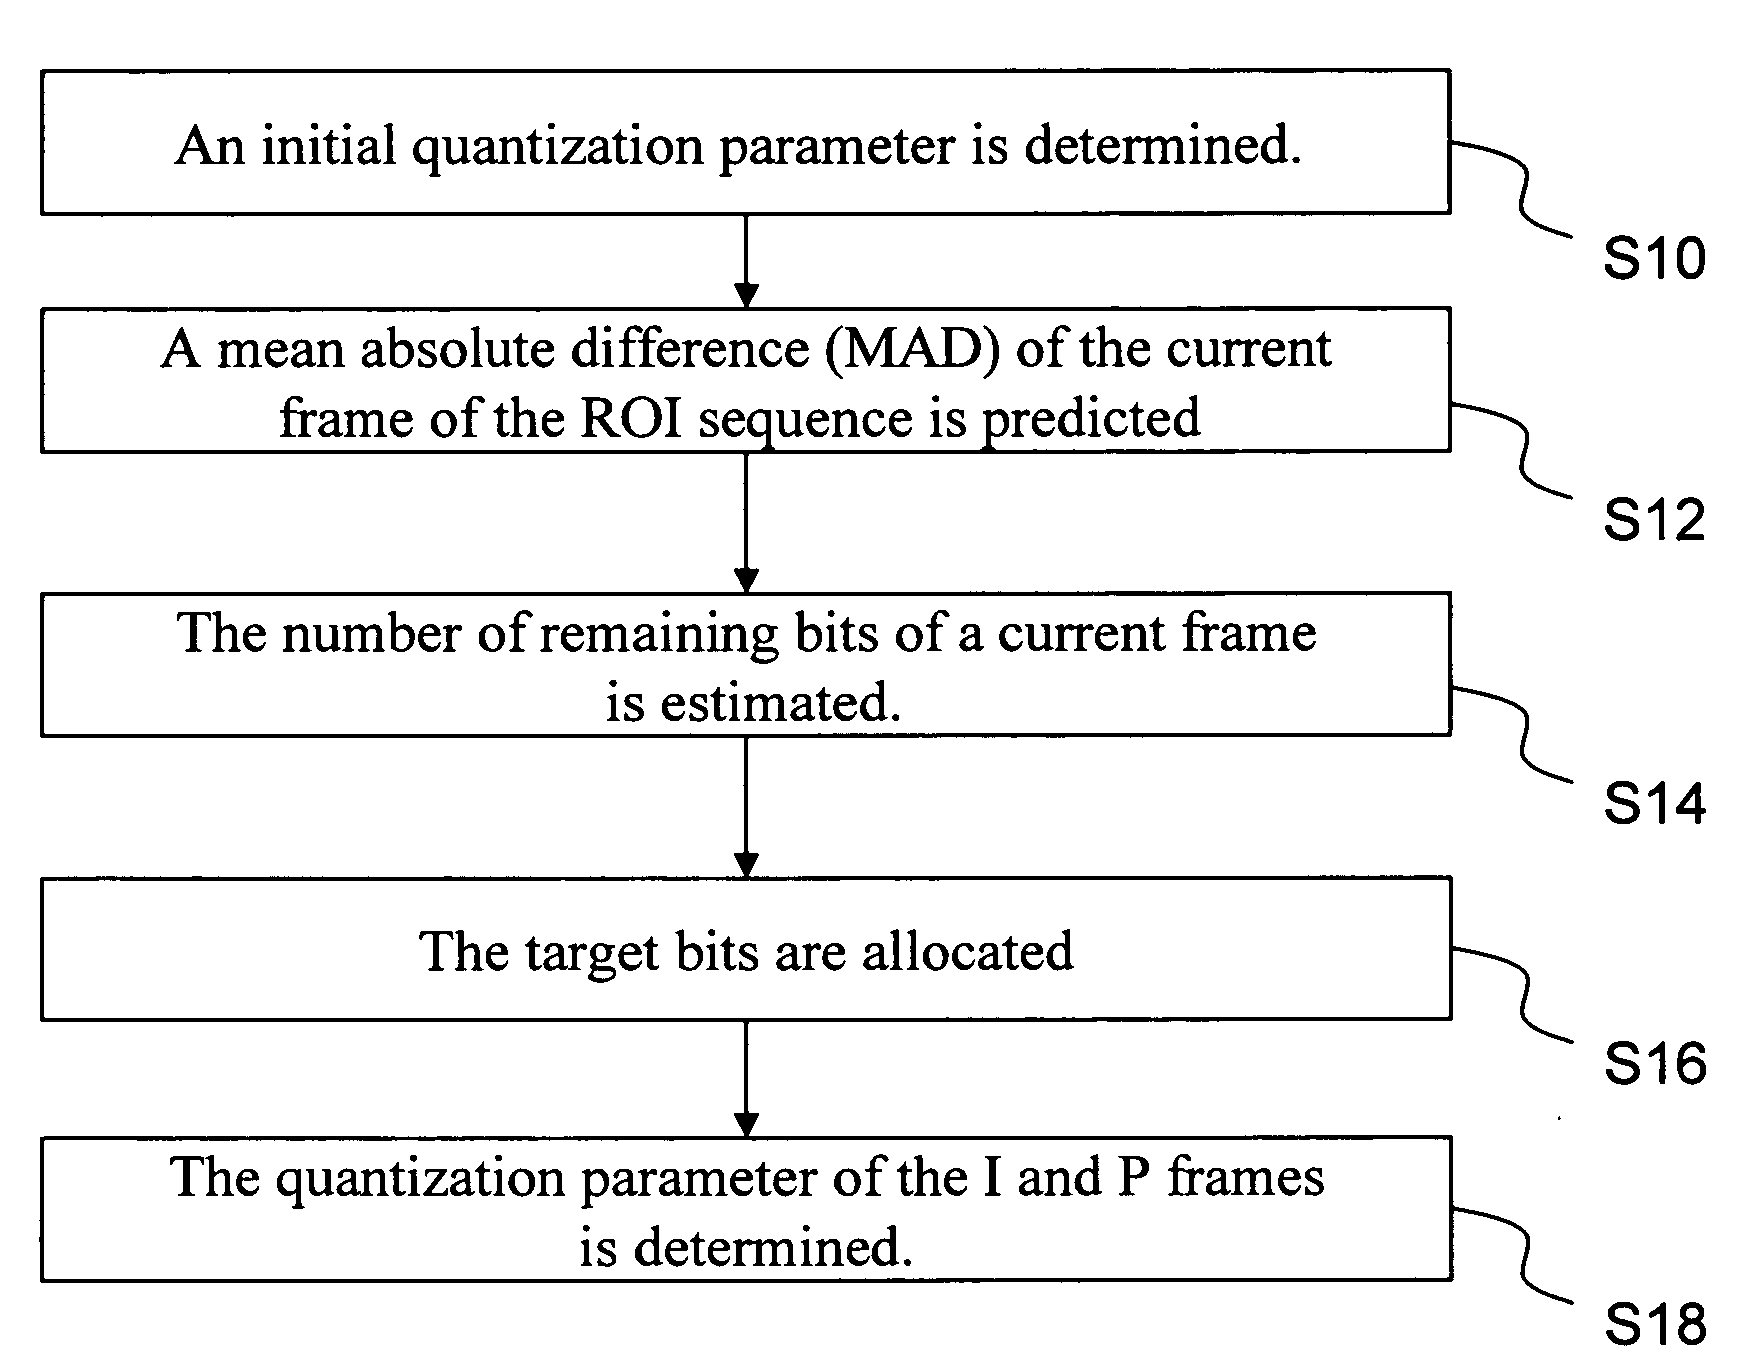 Constant-quality rate control system and algorithm for regions of interest